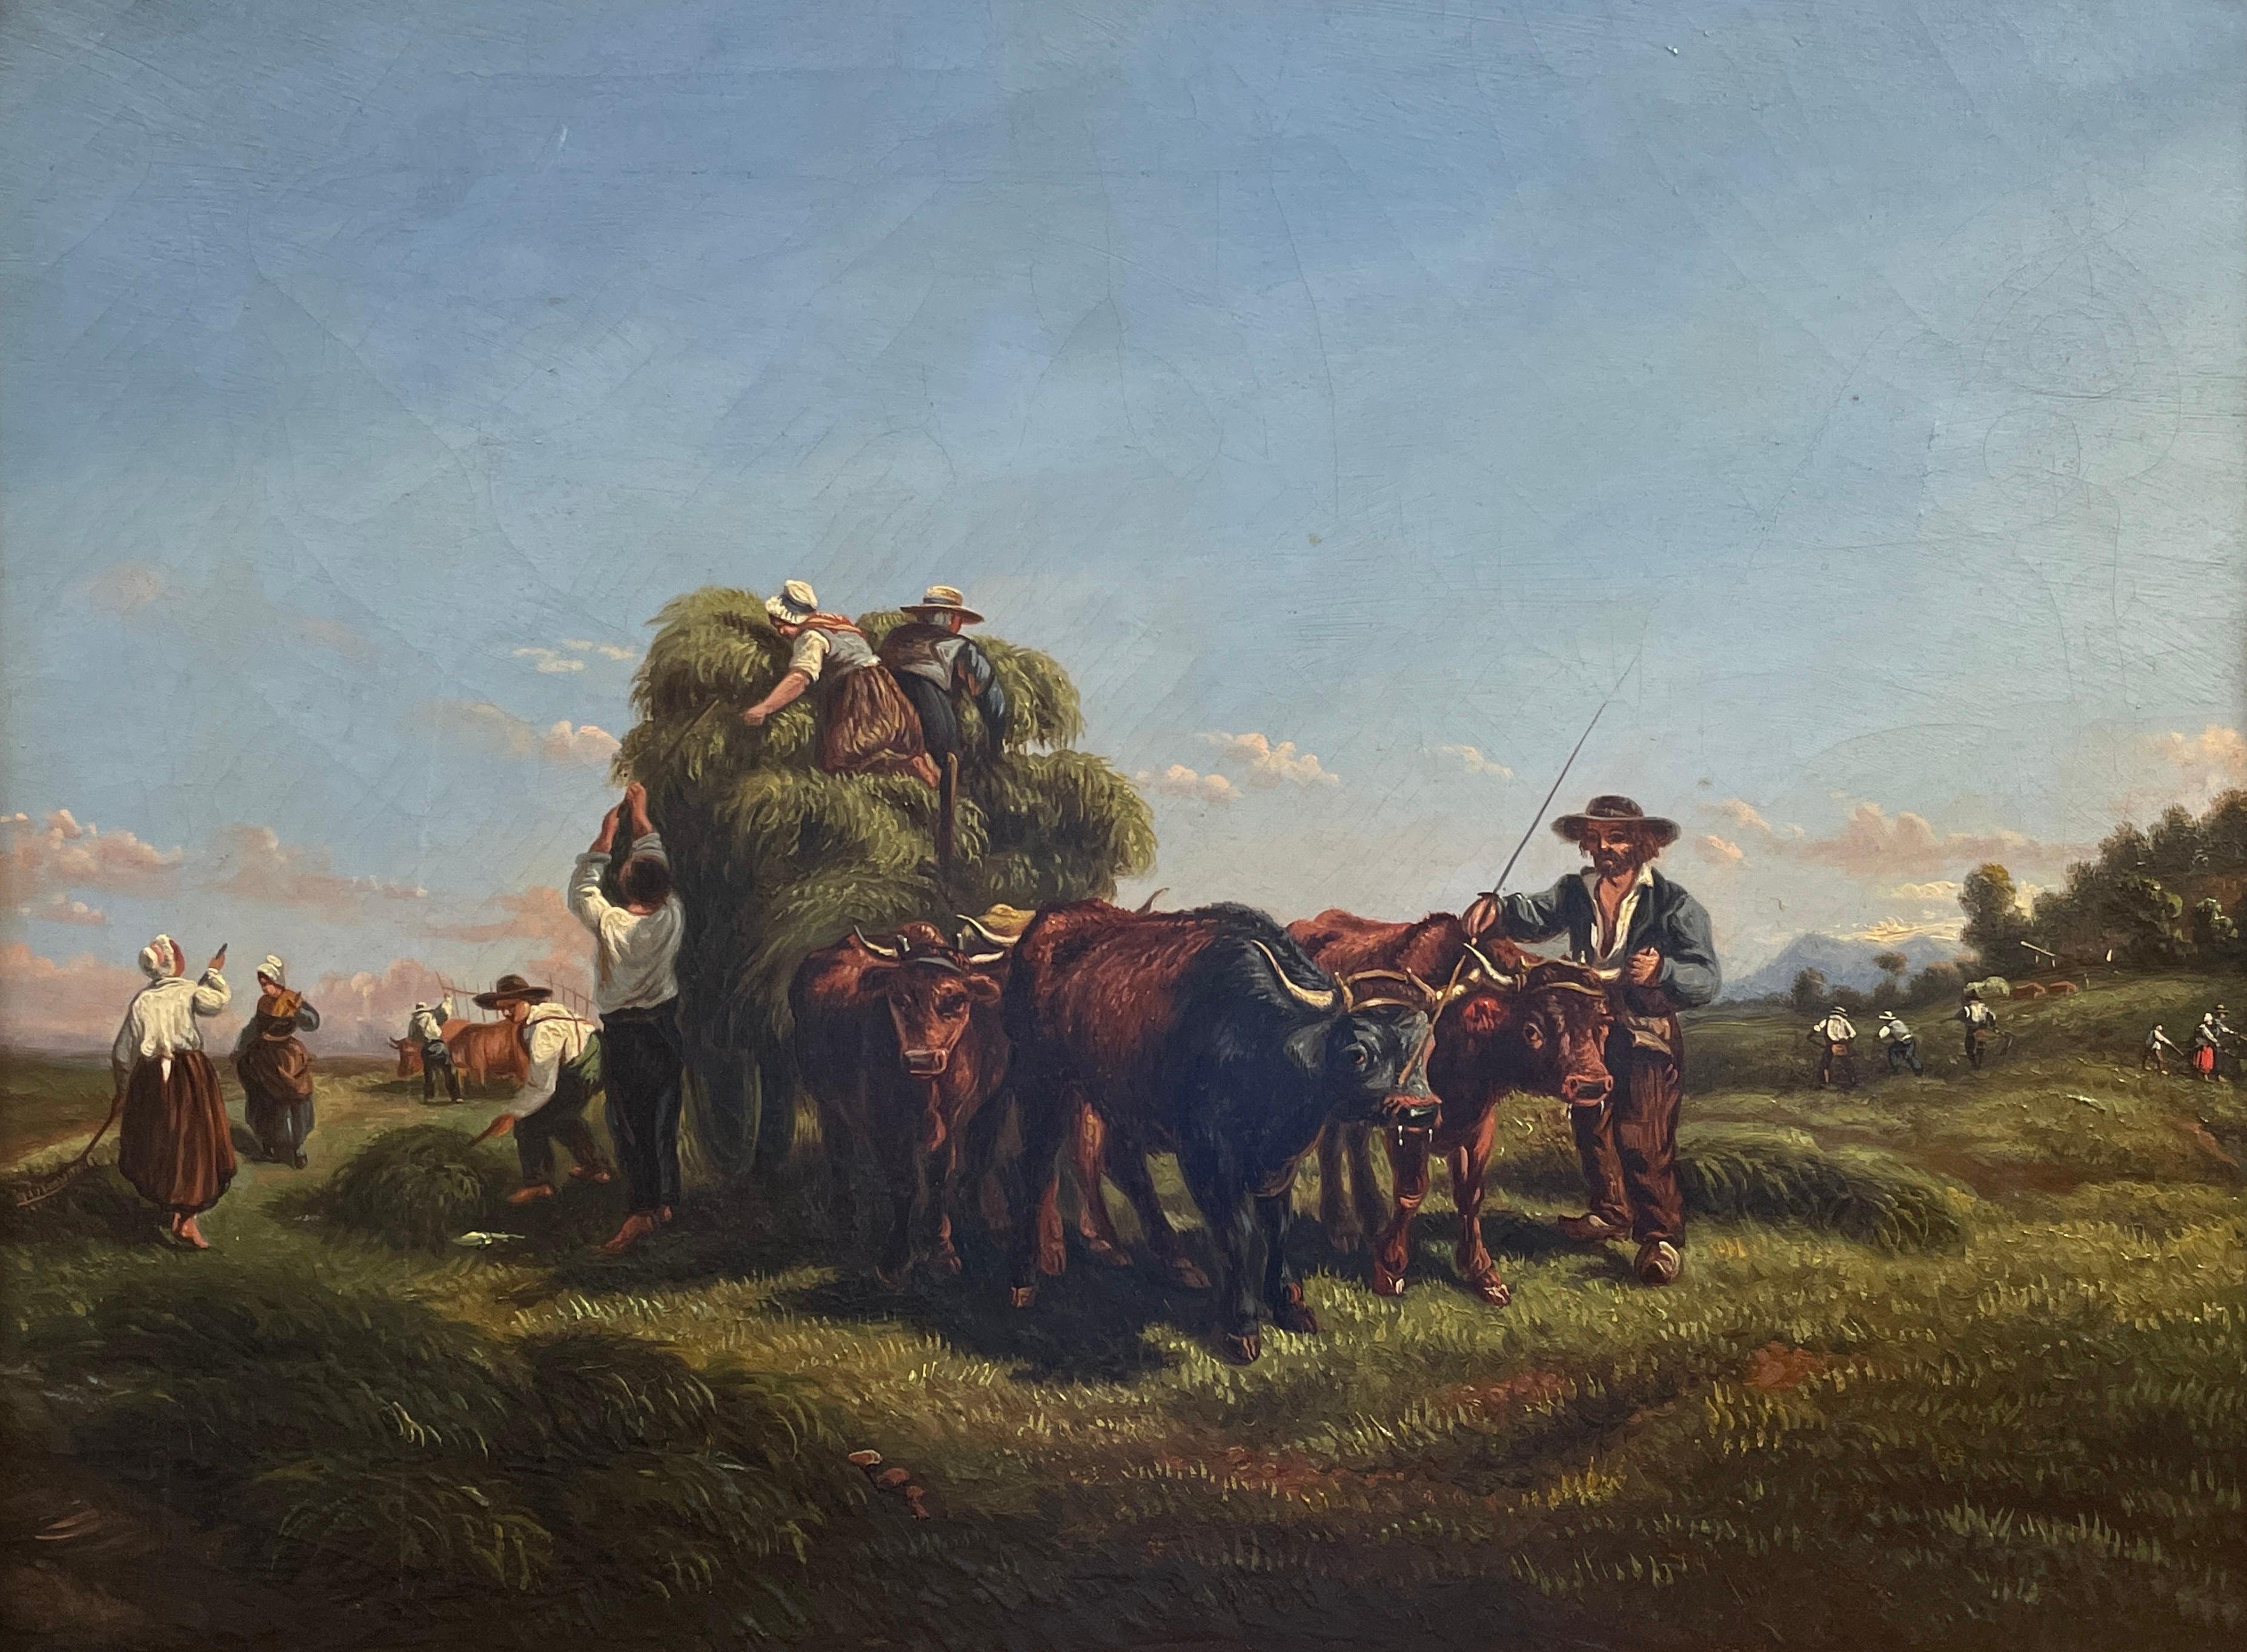 19thC French Landscape Painting - Harvest Workers Loading Hay Cart in Summer Fields, 19th Century French Oil 